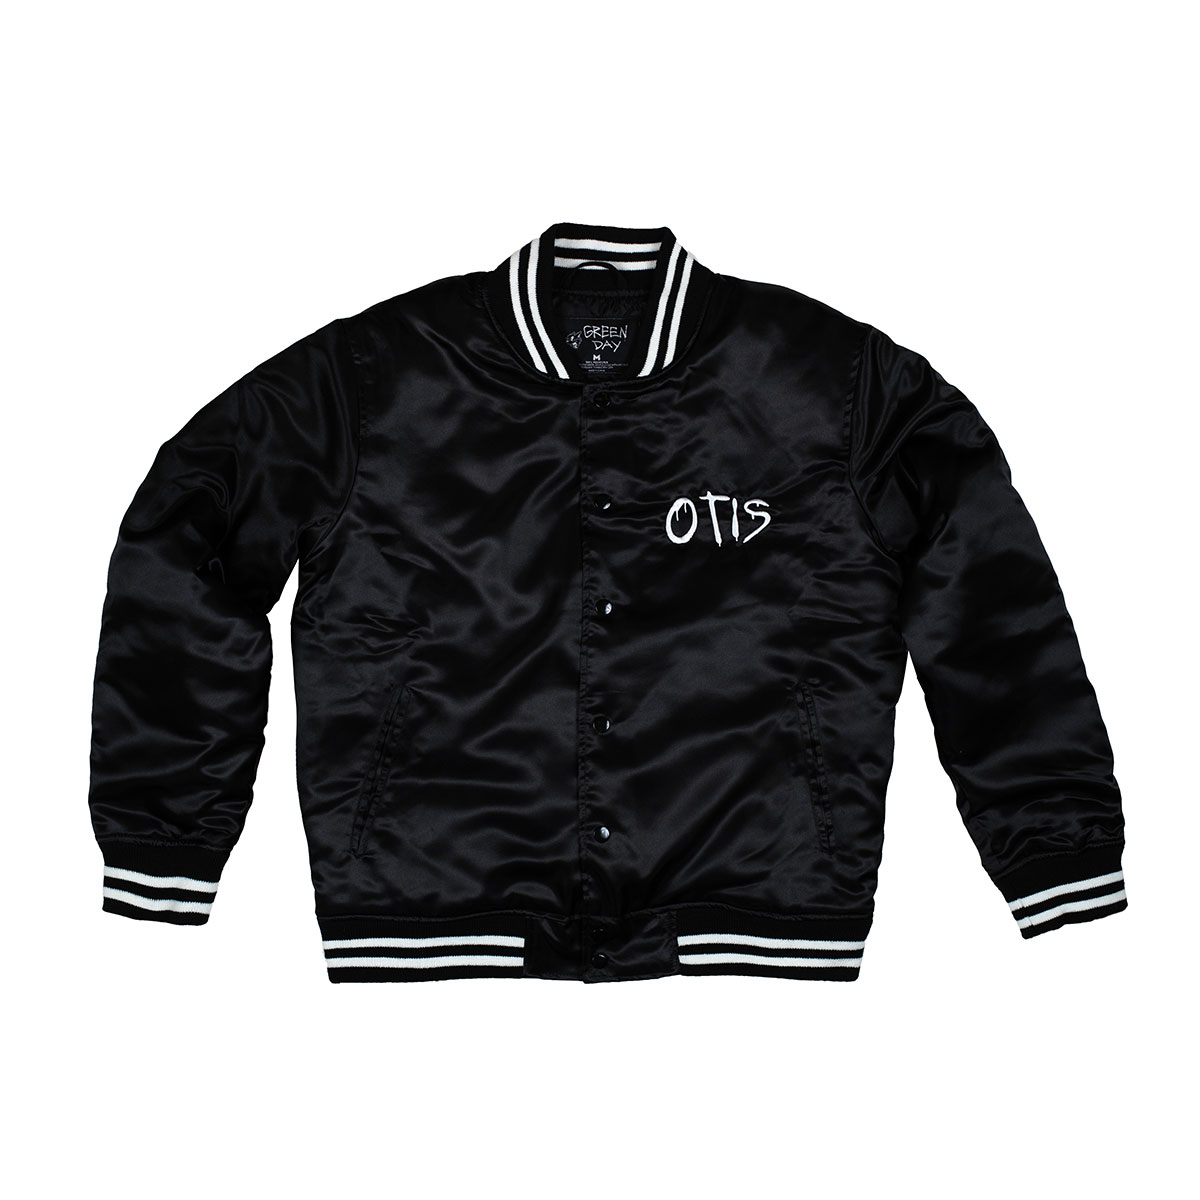 Rev Rad Jacket | Green Day Official Store